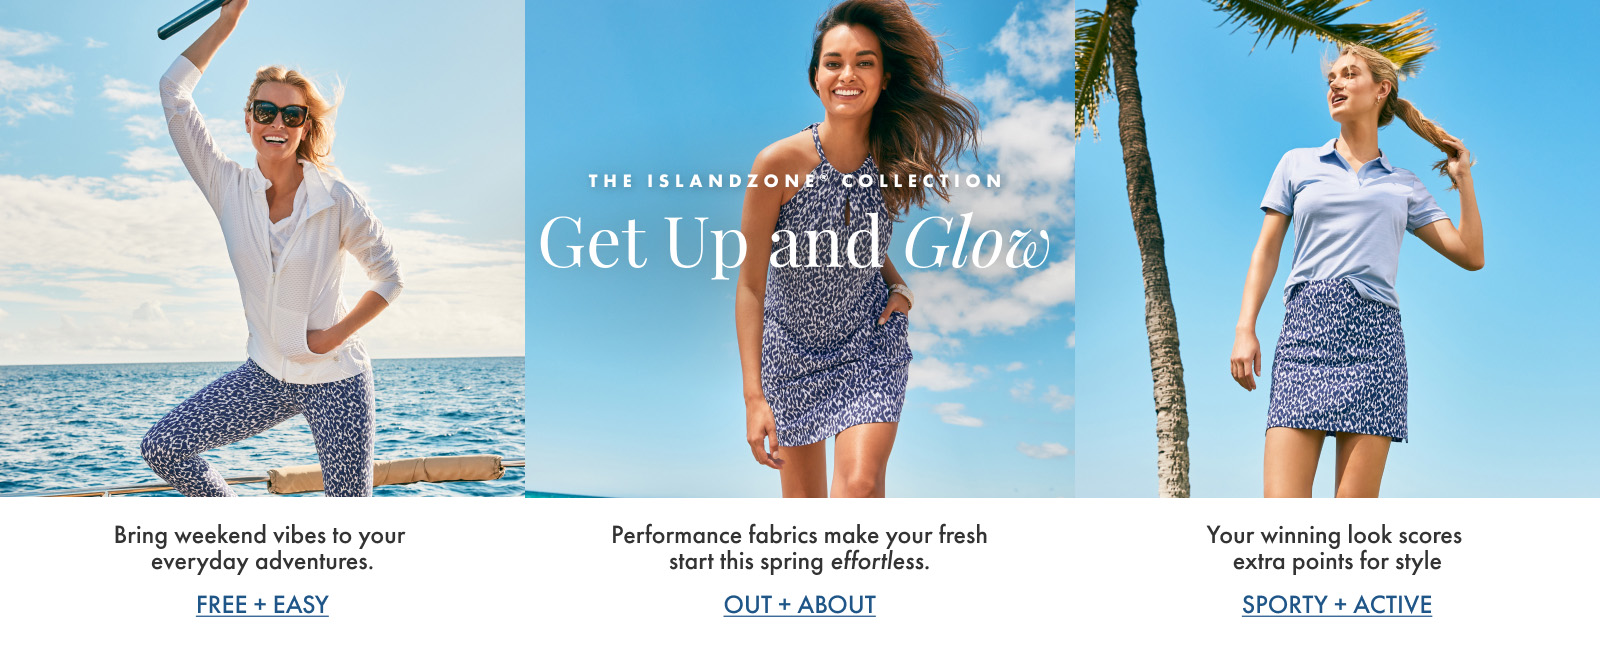 The IslandZone® Collection - Get Up and Glow